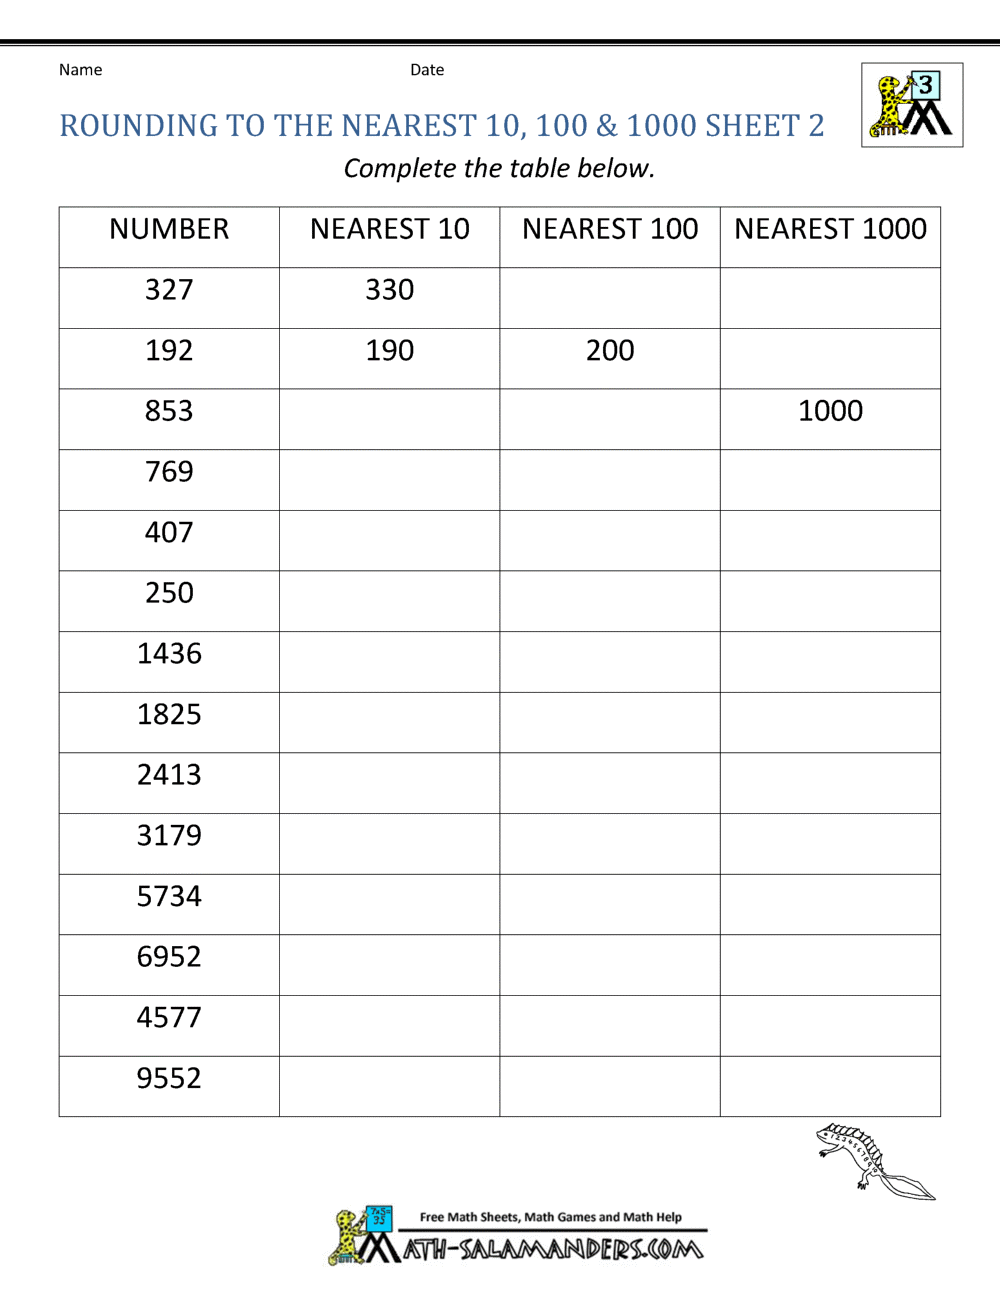 rounding-worksheet-to-the-nearest-1000-rounding-worksheets-practice-questions-and-answers